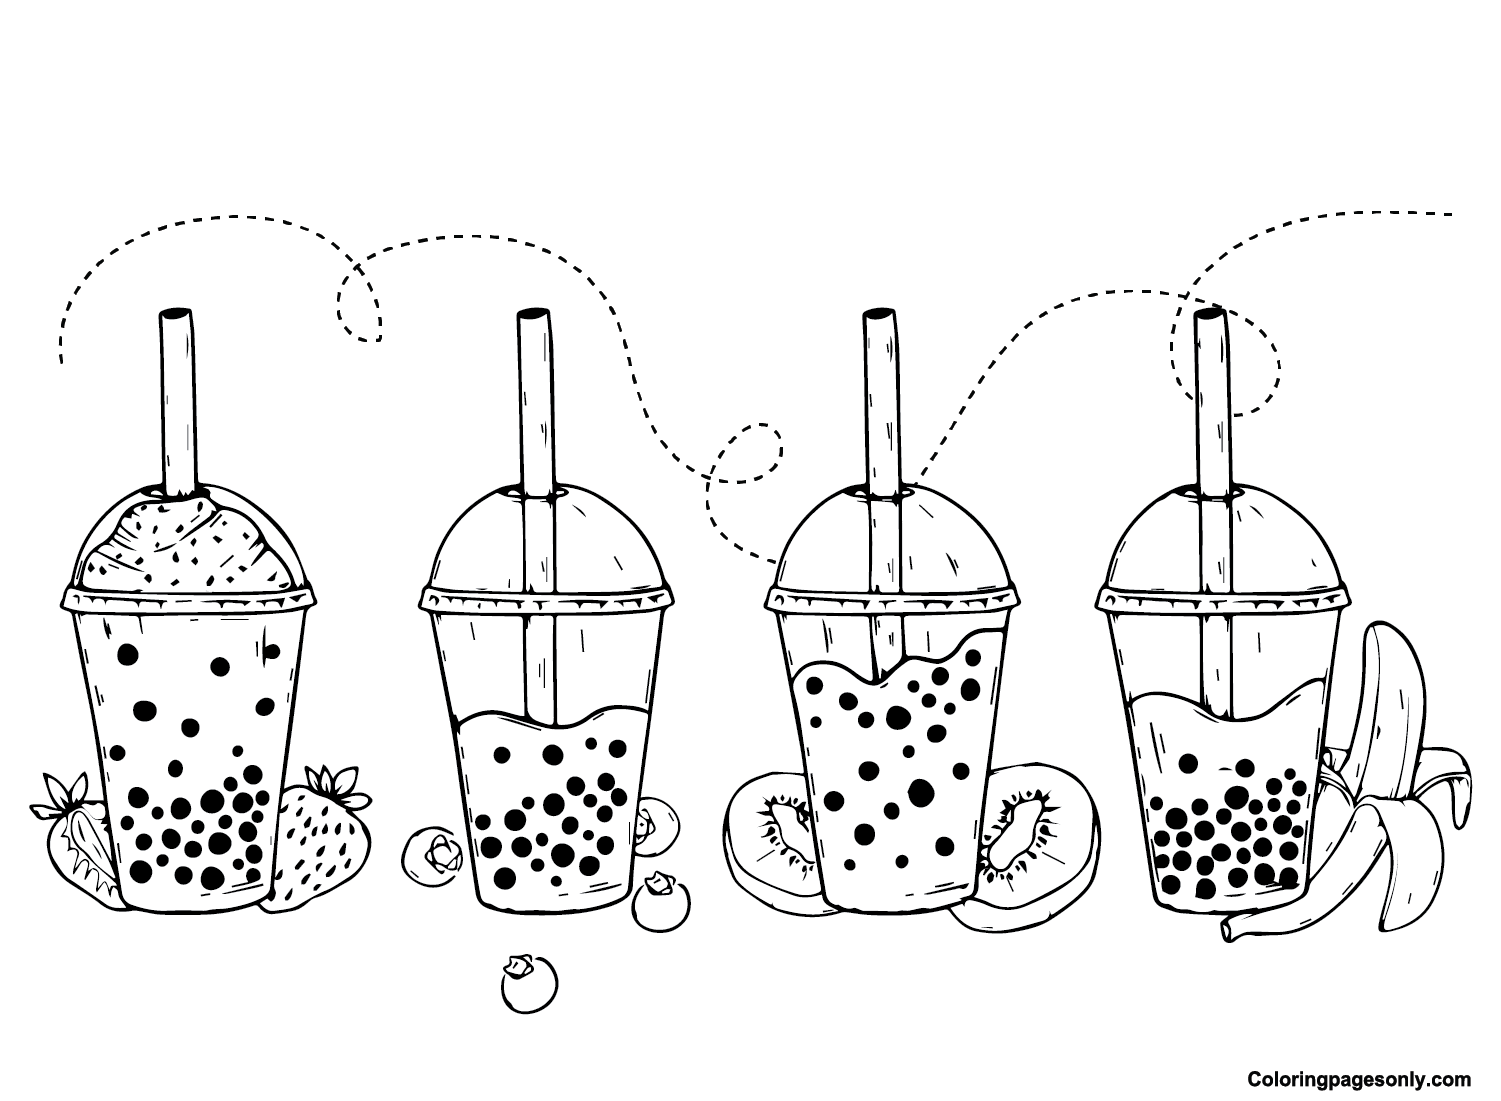 Images Boba Tea Coloring Page